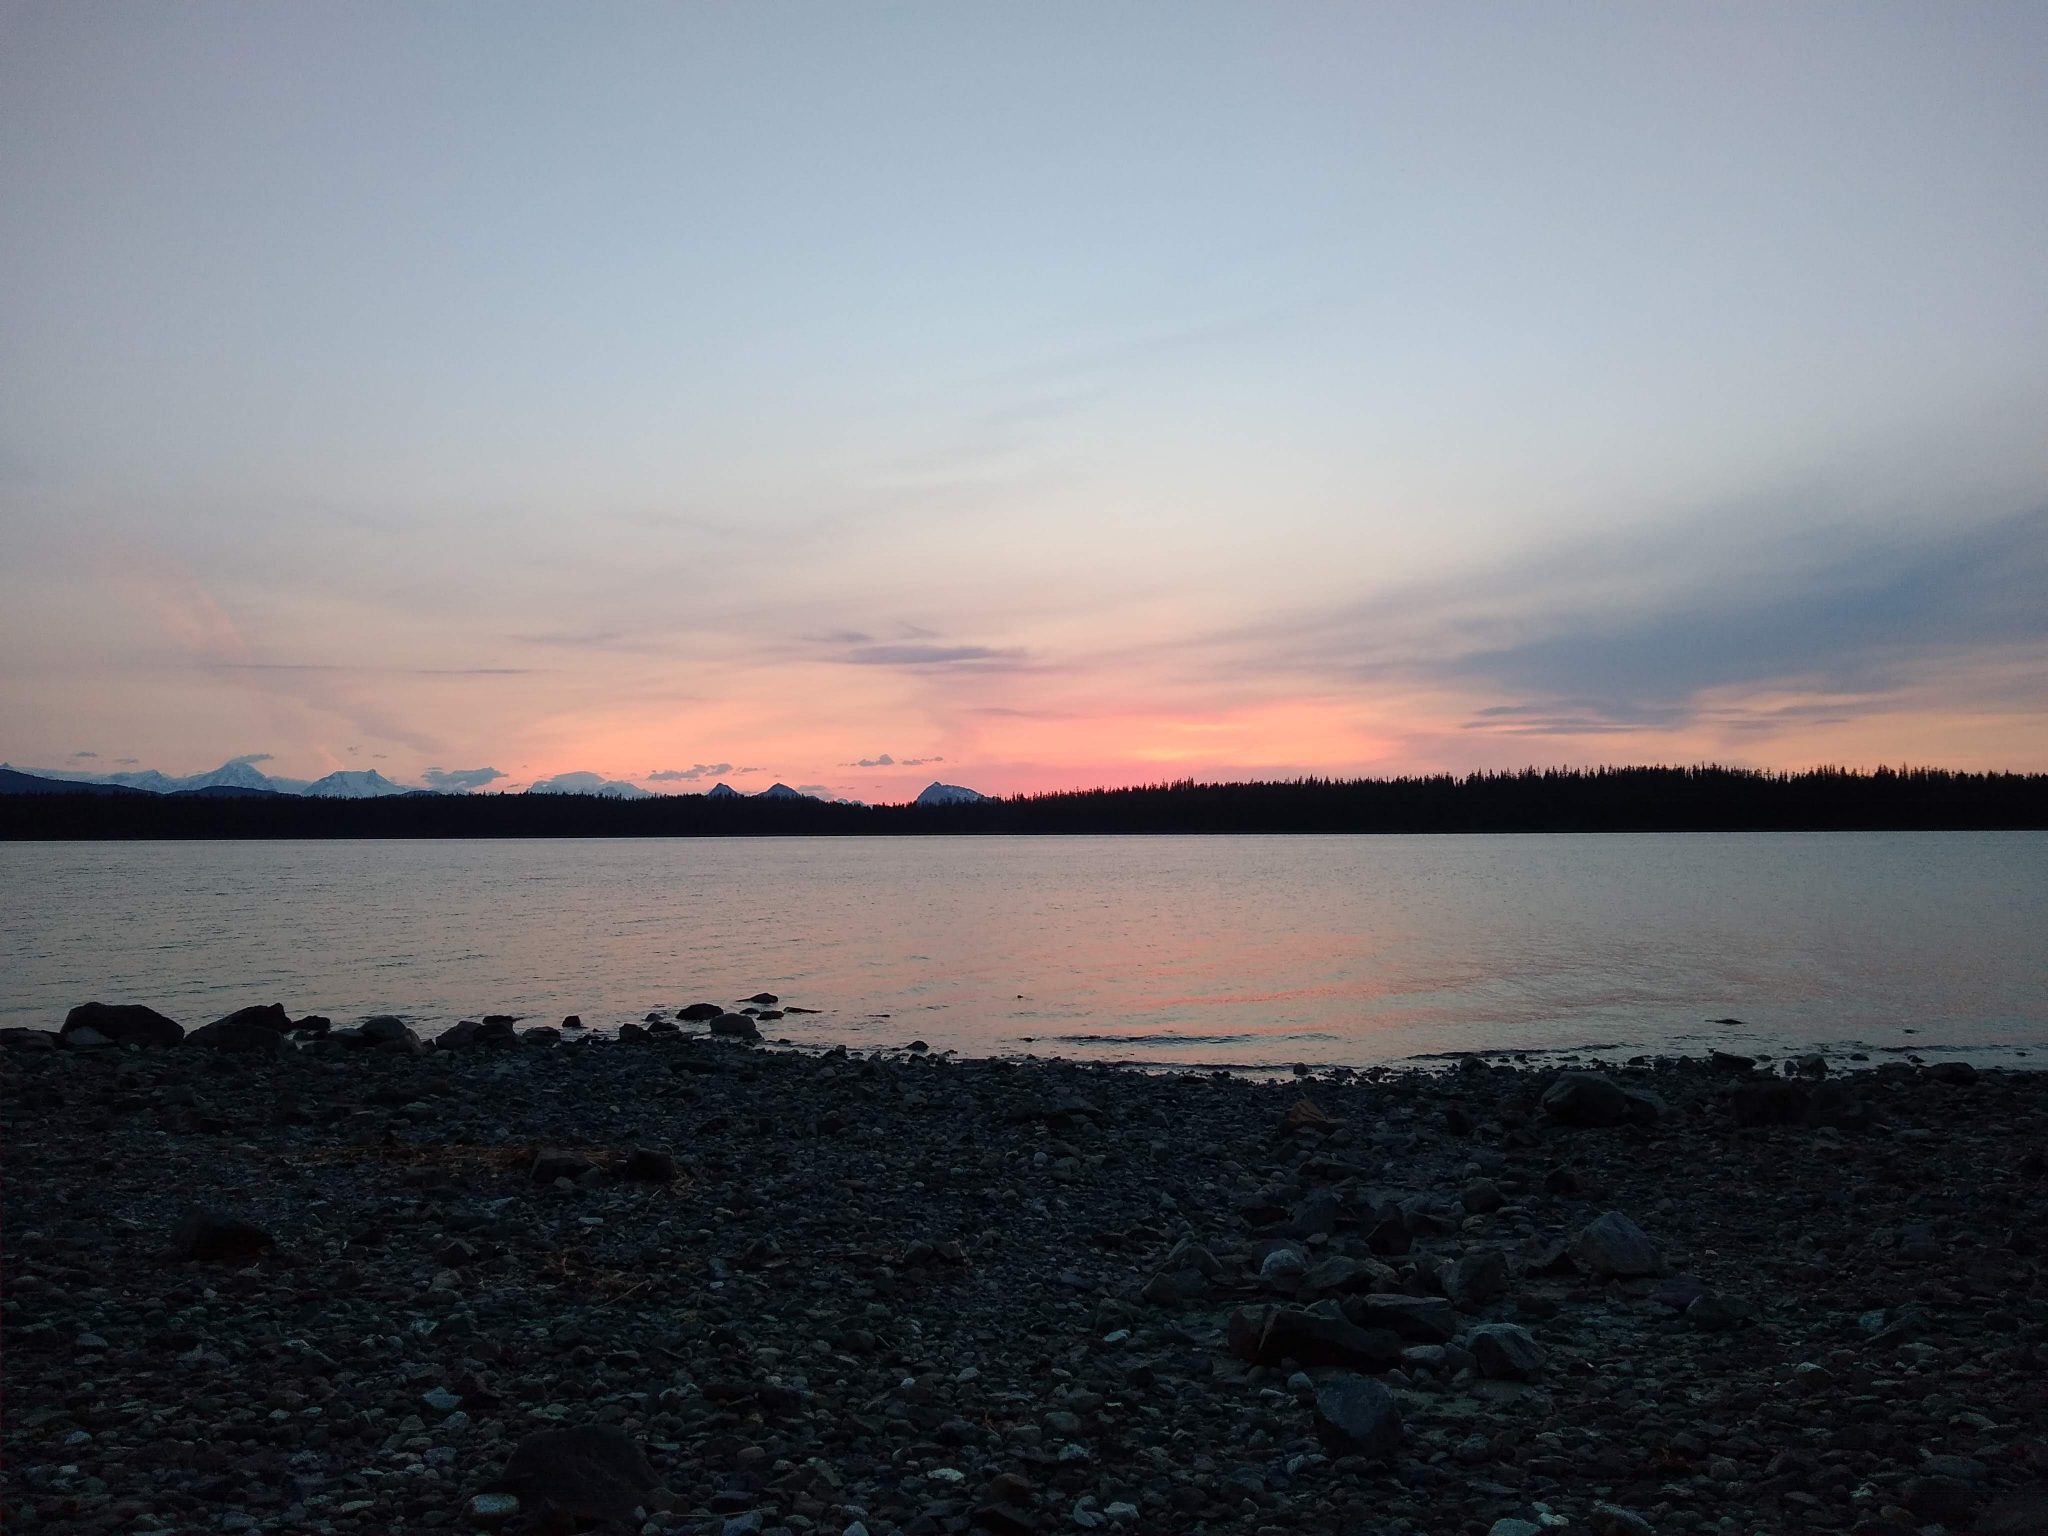 A pink sunset behind distant mountains and a forested island. In the foreground is the beach in the campground at Bartlett Cove campground to visit Glacier bay national park